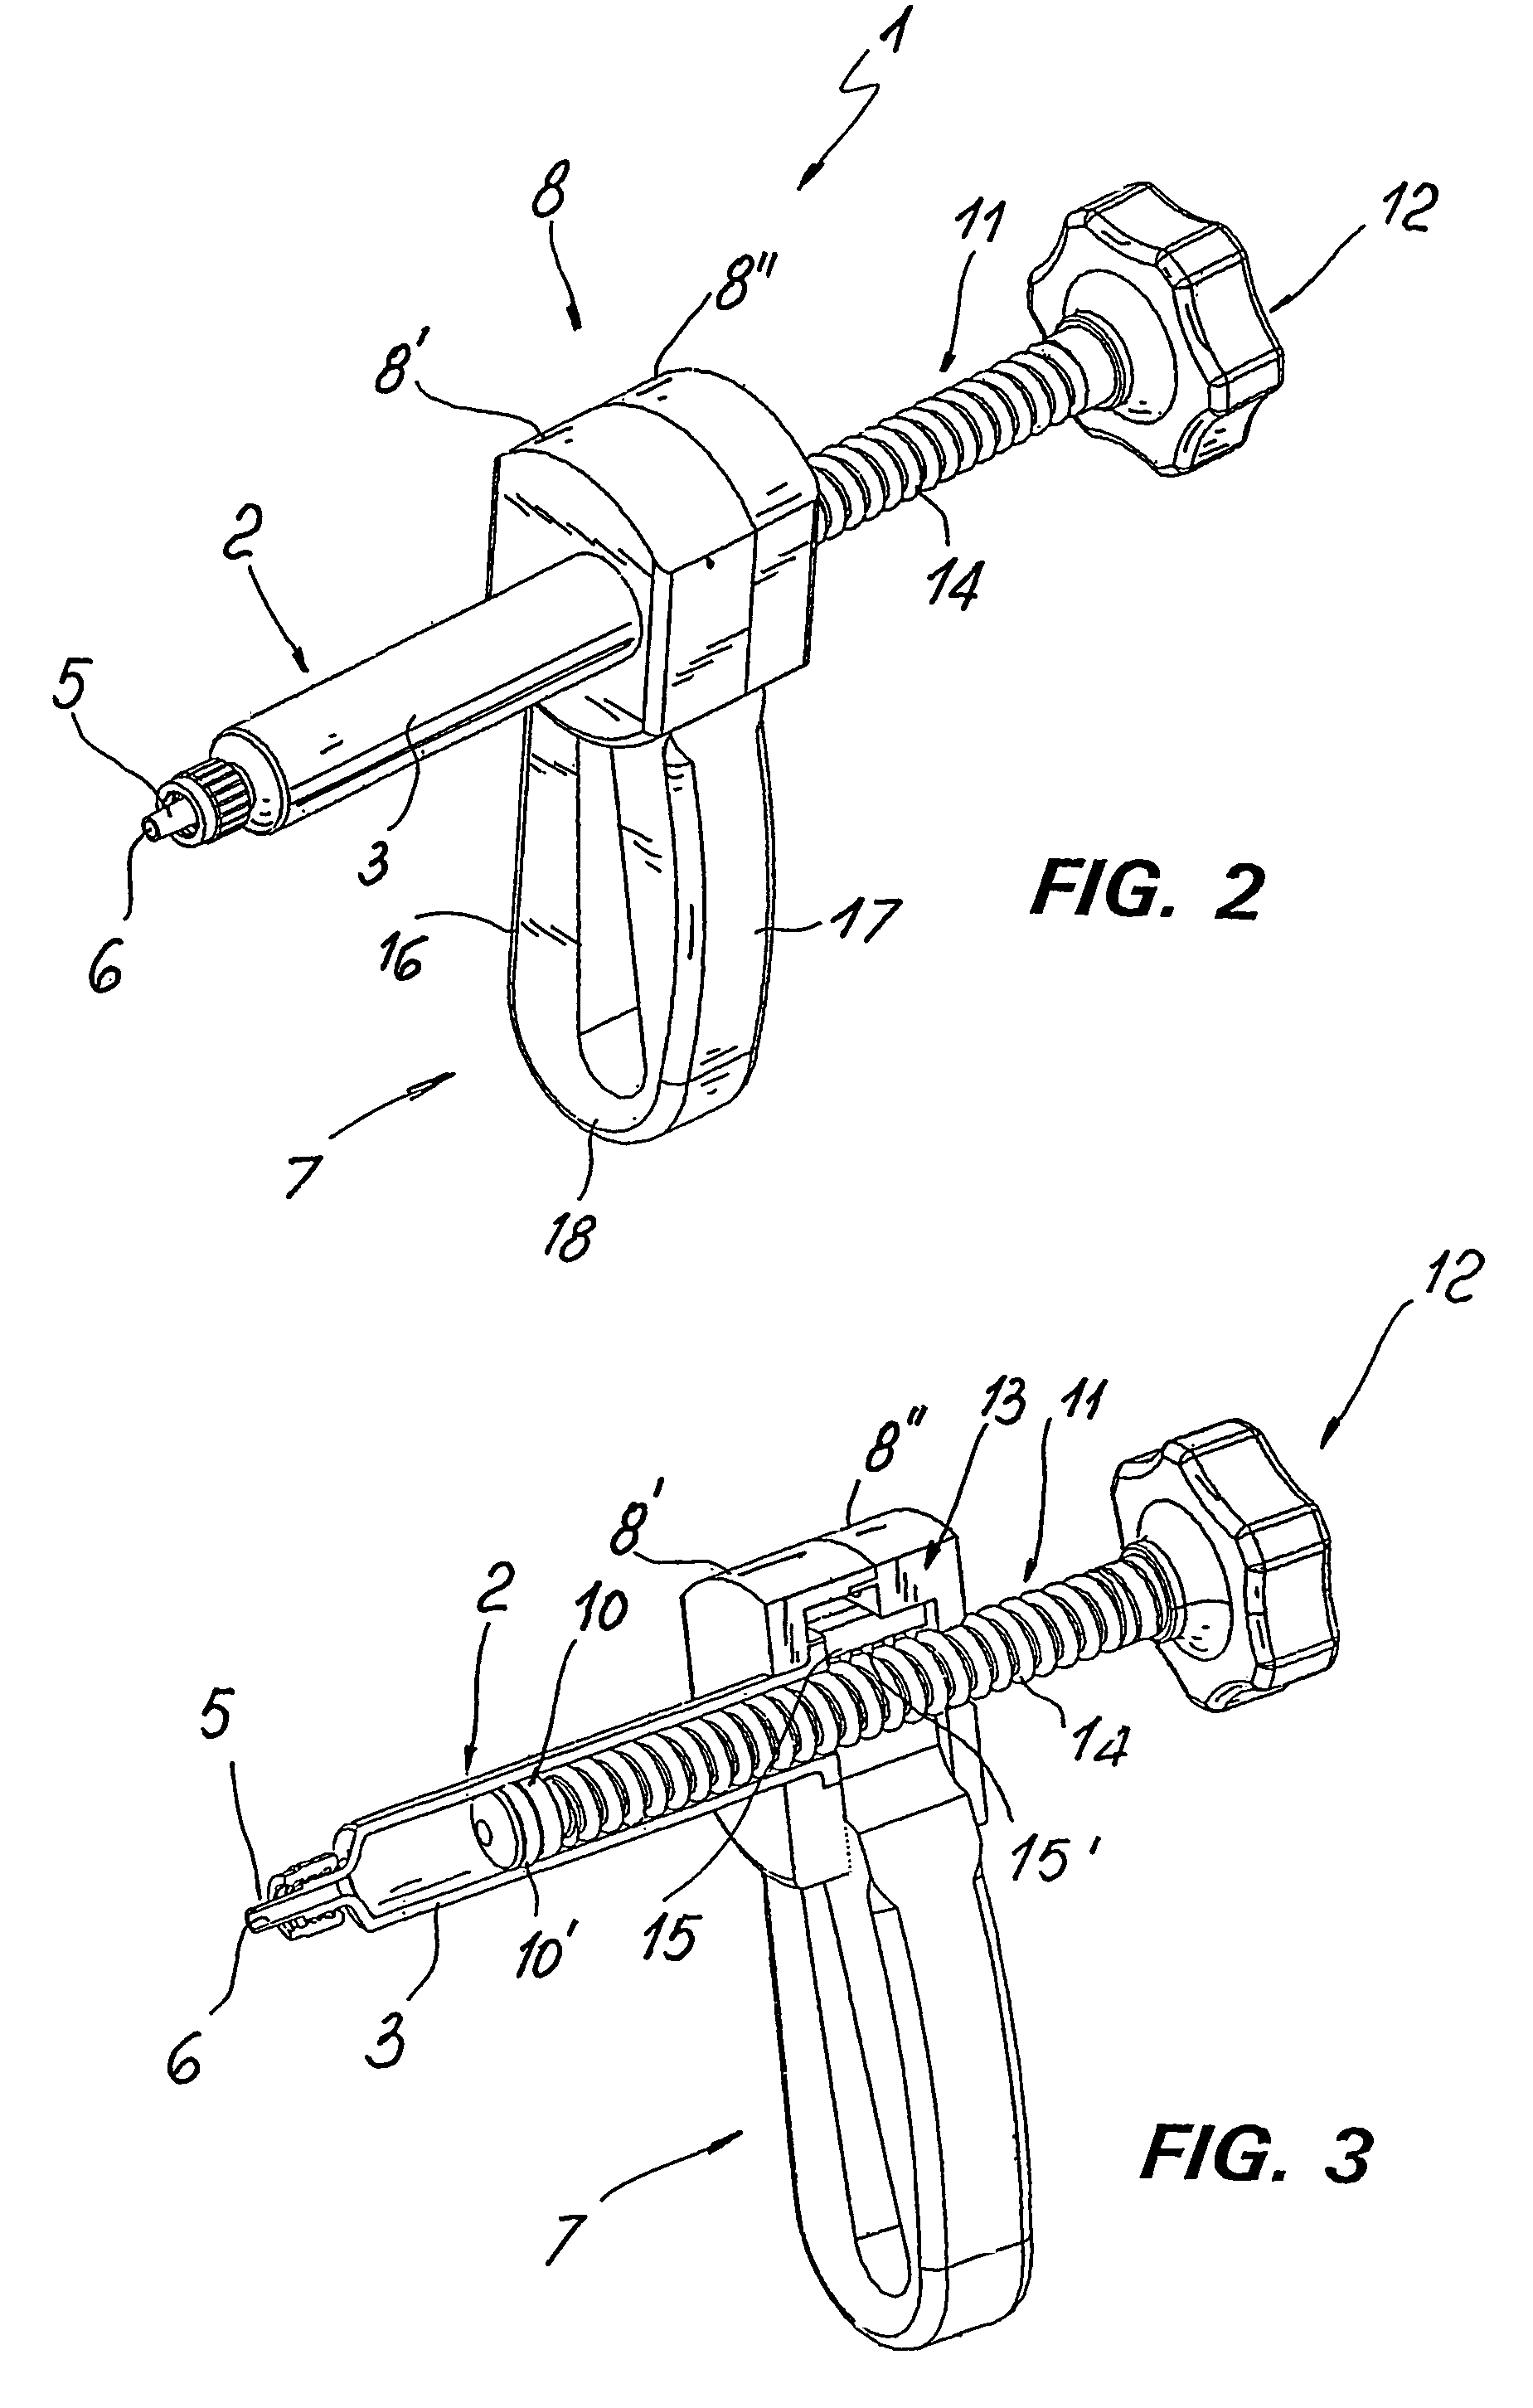 Device for the manual metering of a medical fluid, particularly bone cement